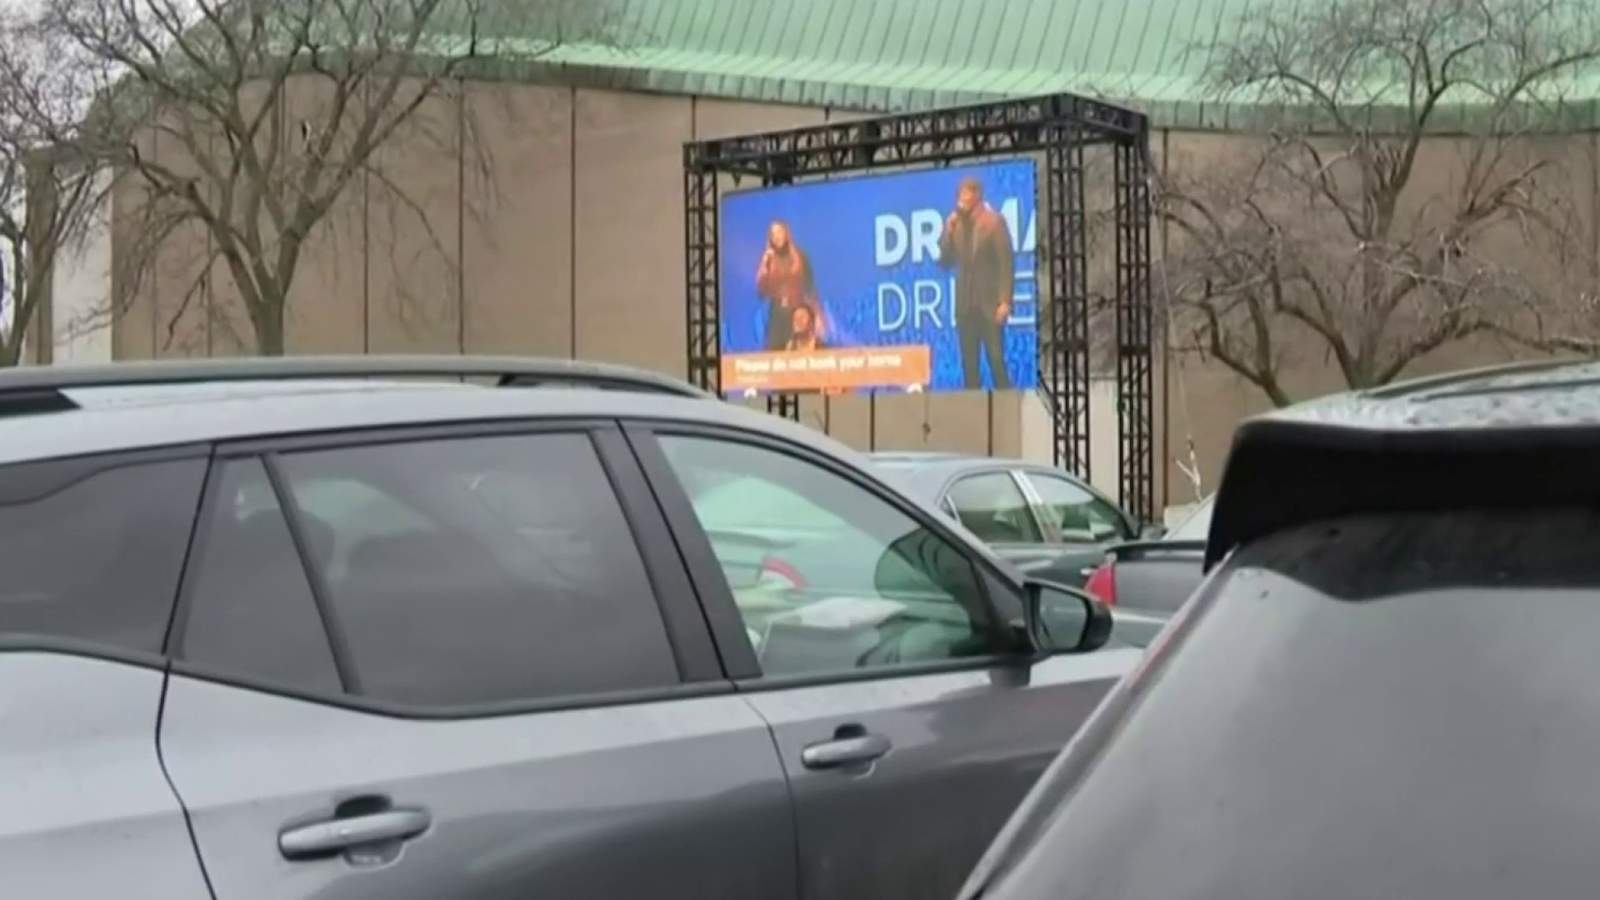 Triumph Church honors Martin Luther King Jr. though drive-in service in Southfield